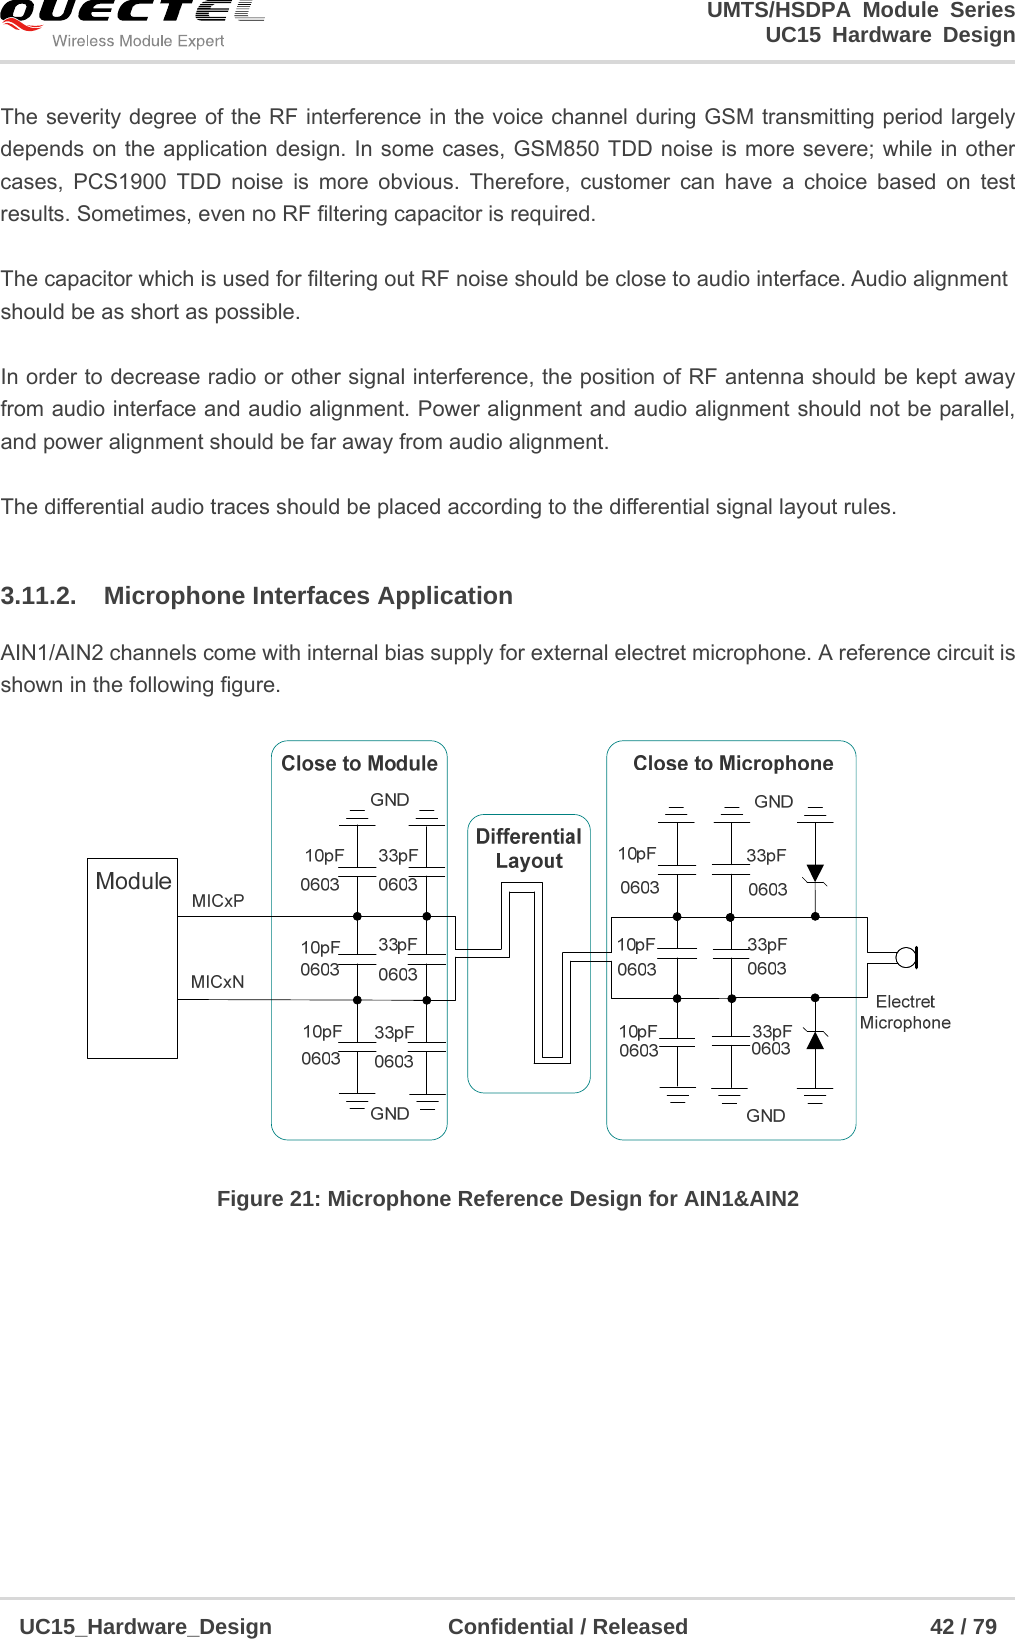                                                                        UMTS/HSDPA Module Series                                                                 UC15 Hardware Design  UC15_Hardware_Design                Confidential / Released                      42 / 79    The severity degree of the RF interference in the voice channel during GSM transmitting period largely depends on the application design. In some cases, GSM850 TDD noise is more severe; while in other cases, PCS1900 TDD noise is more obvious. Therefore, customer can have a choice based on test results. Sometimes, even no RF filtering capacitor is required.  The capacitor which is used for filtering out RF noise should be close to audio interface. Audio alignment should be as short as possible.  In order to decrease radio or other signal interference, the position of RF antenna should be kept away from audio interface and audio alignment. Power alignment and audio alignment should not be parallel, and power alignment should be far away from audio alignment.  The differential audio traces should be placed according to the differential signal layout rules.    3.11.2.  Microphone Interfaces Application AIN1/AIN2 channels come with internal bias supply for external electret microphone. A reference circuit is shown in the following figure.    Figure 21: Microphone Reference Design for AIN1&amp;AIN2  